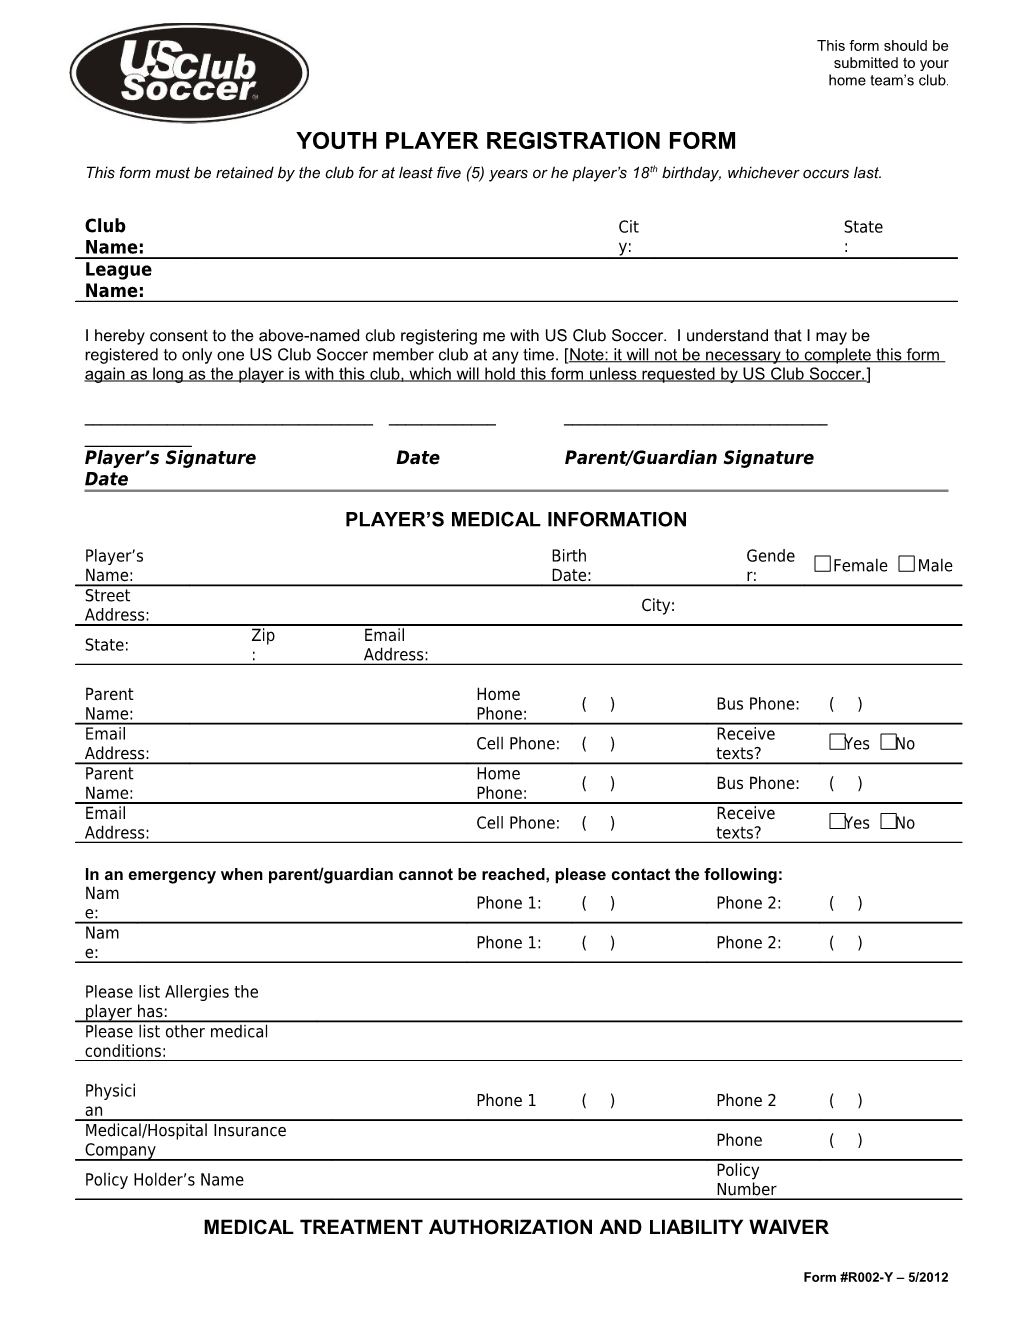 This Form Should Be Submitted to Your Home Team S Club